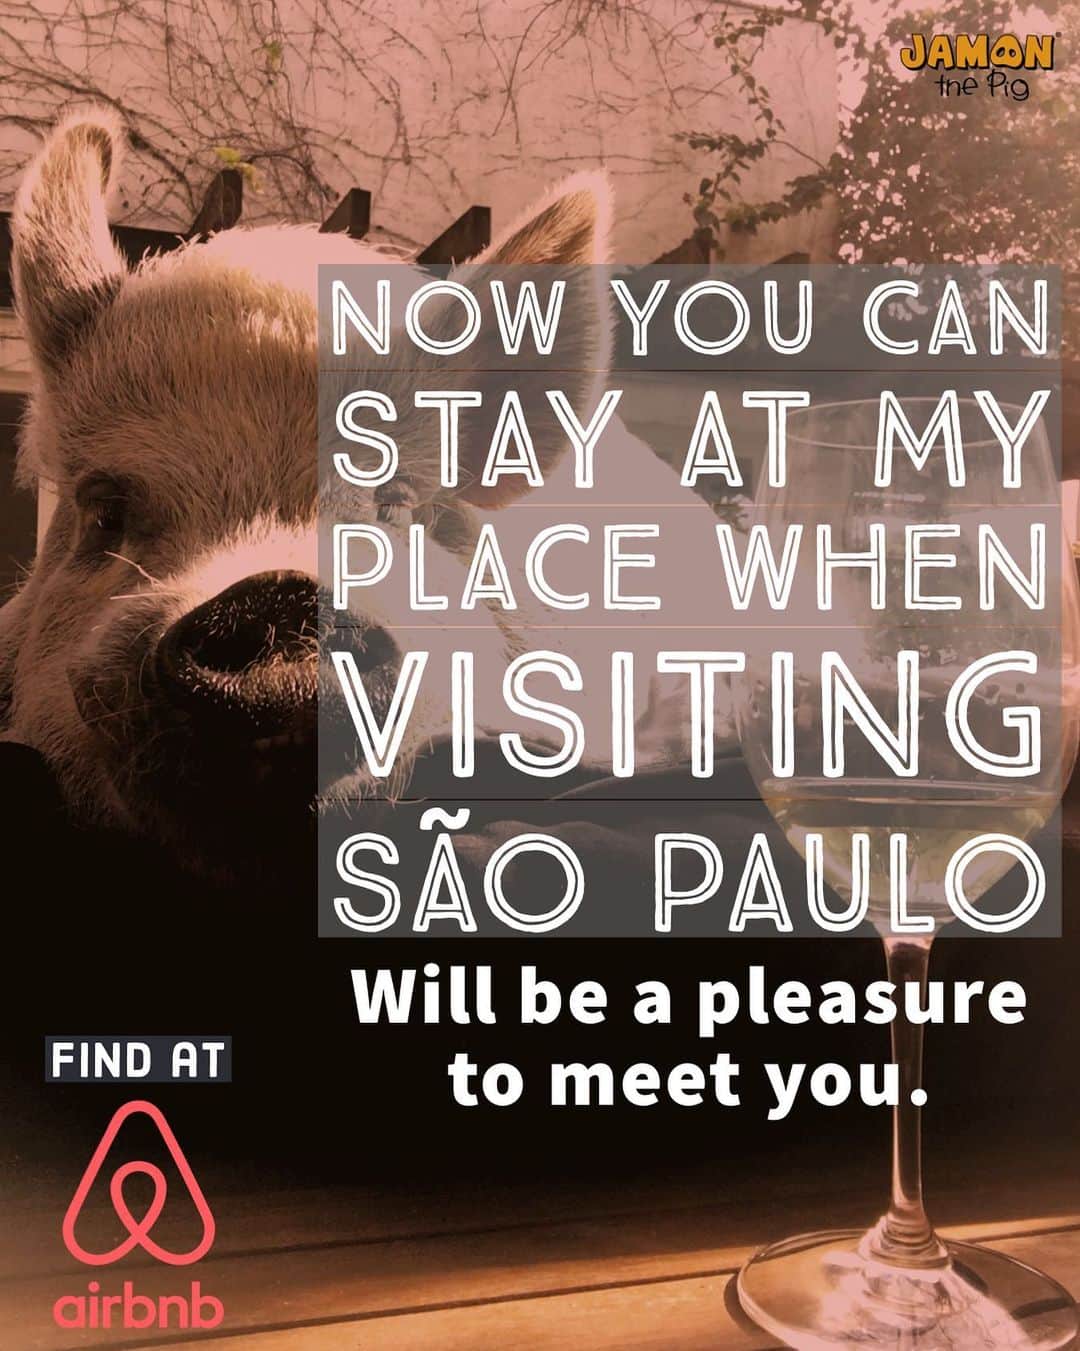 Jamonのインスタグラム：「This is true! Now you can stay at my place when visiting São Paulo and you can take some pictures, give some belly rubs, food?  You can find our place at @airbnb  Book now your trip!  https://abnb.me/Sau0NMnwh2  #jamonsplace #visitingjamon #jamonthepig」